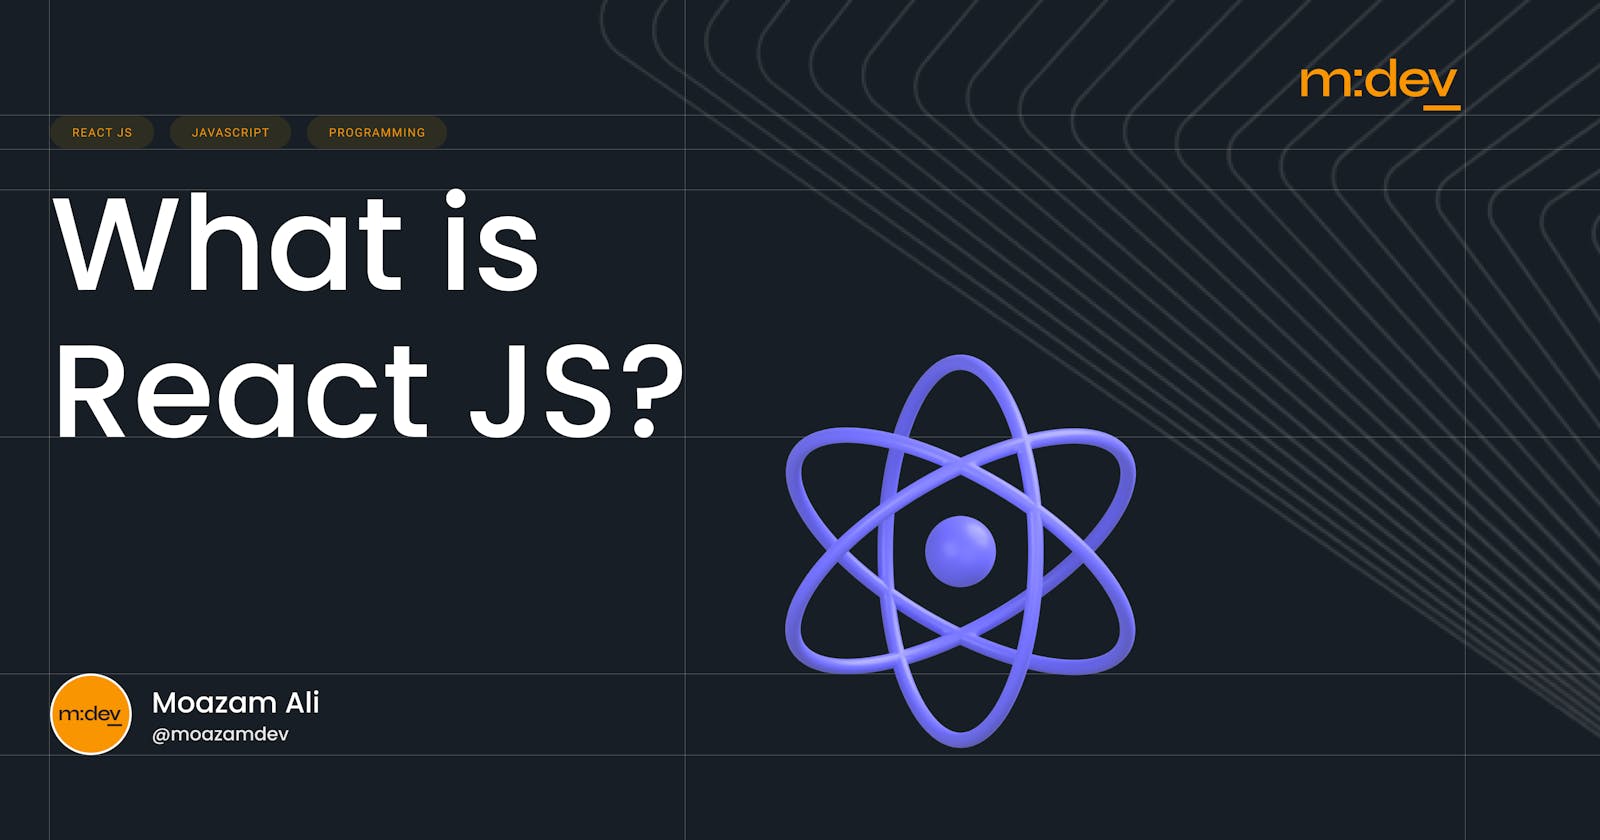 What is React JS?